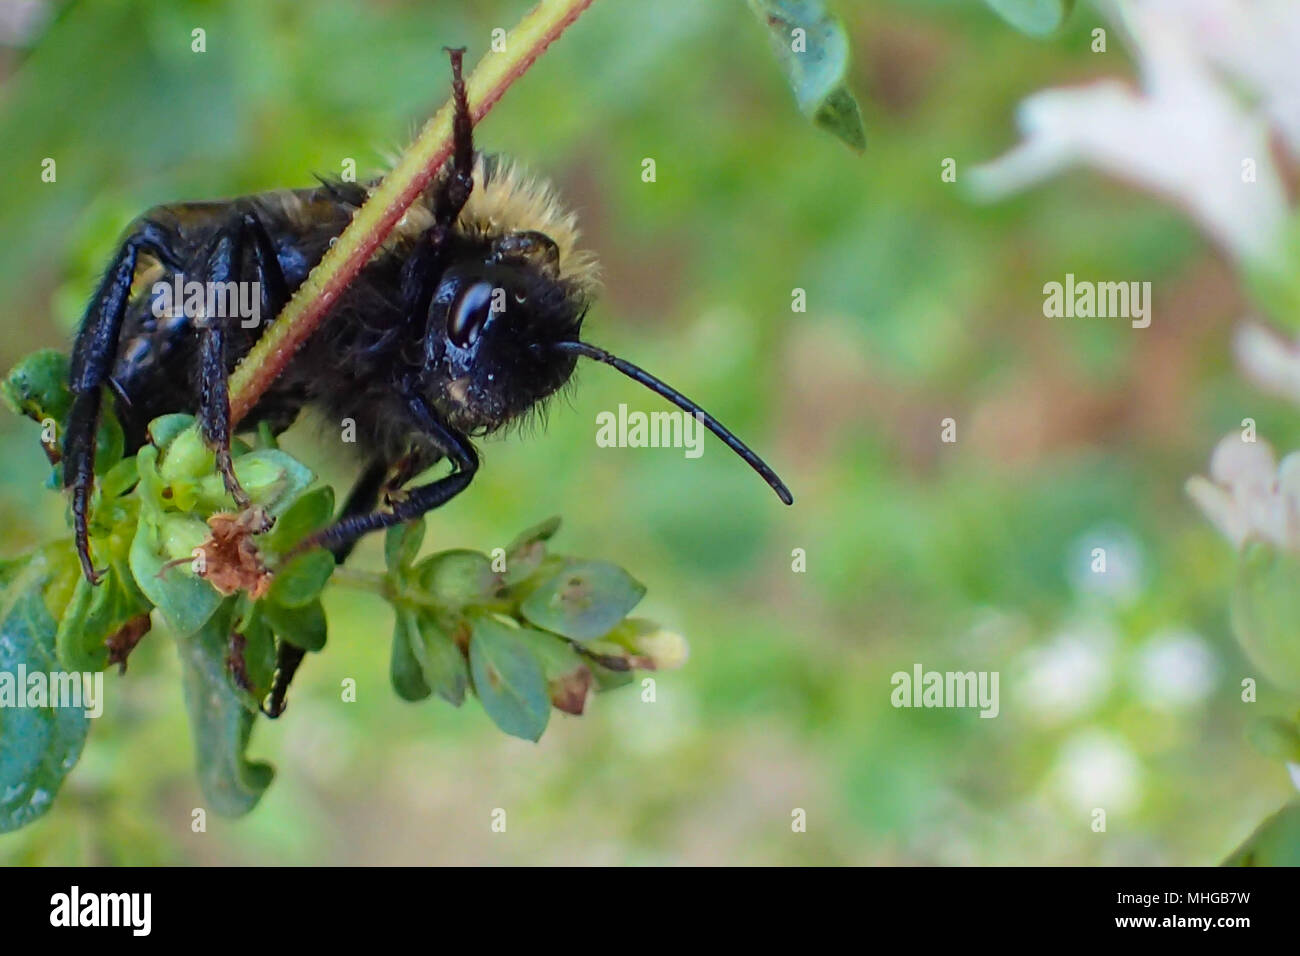 An active bumblebee on a plant. The bumble bee sticking around a flower stalk. Face turned towards the photographer. Picture is taken from underneath Stock Photo